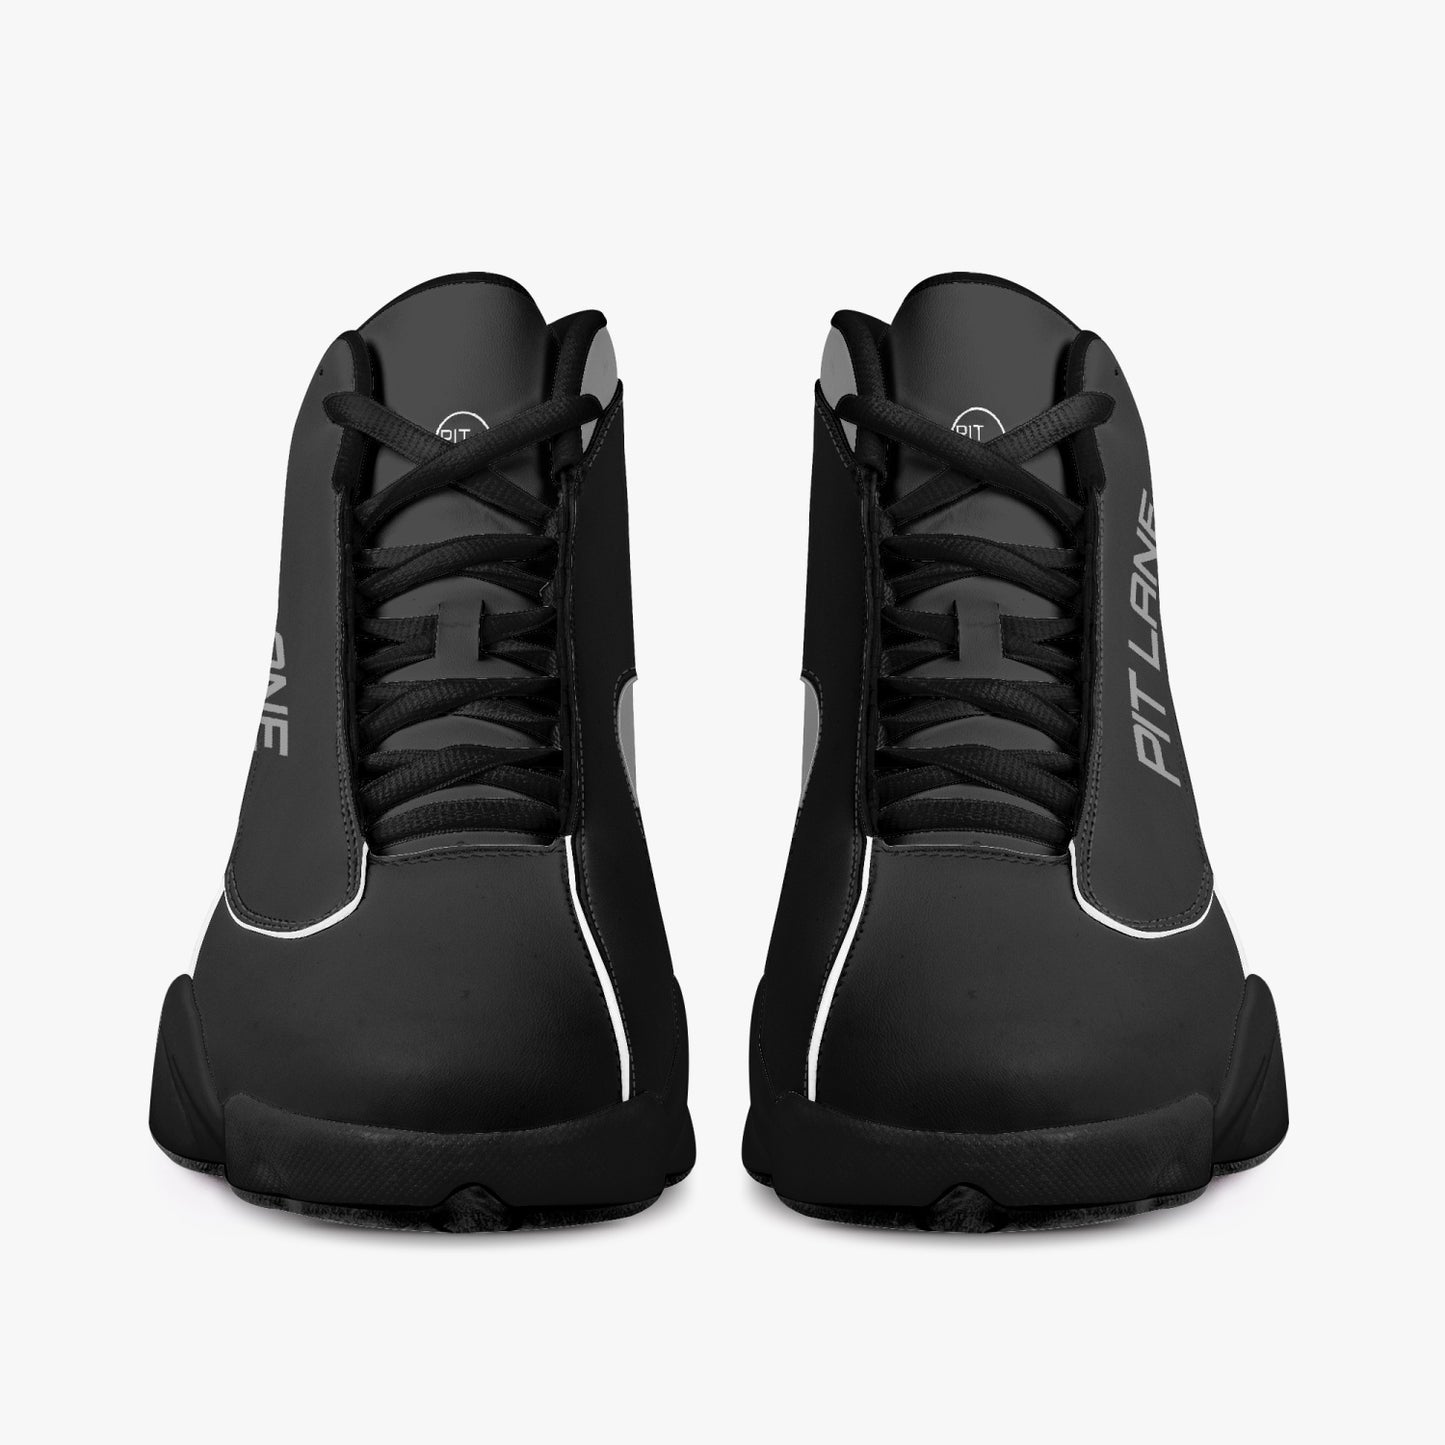 PIT LANE CLOTHING  Victory  Leather Track shoe